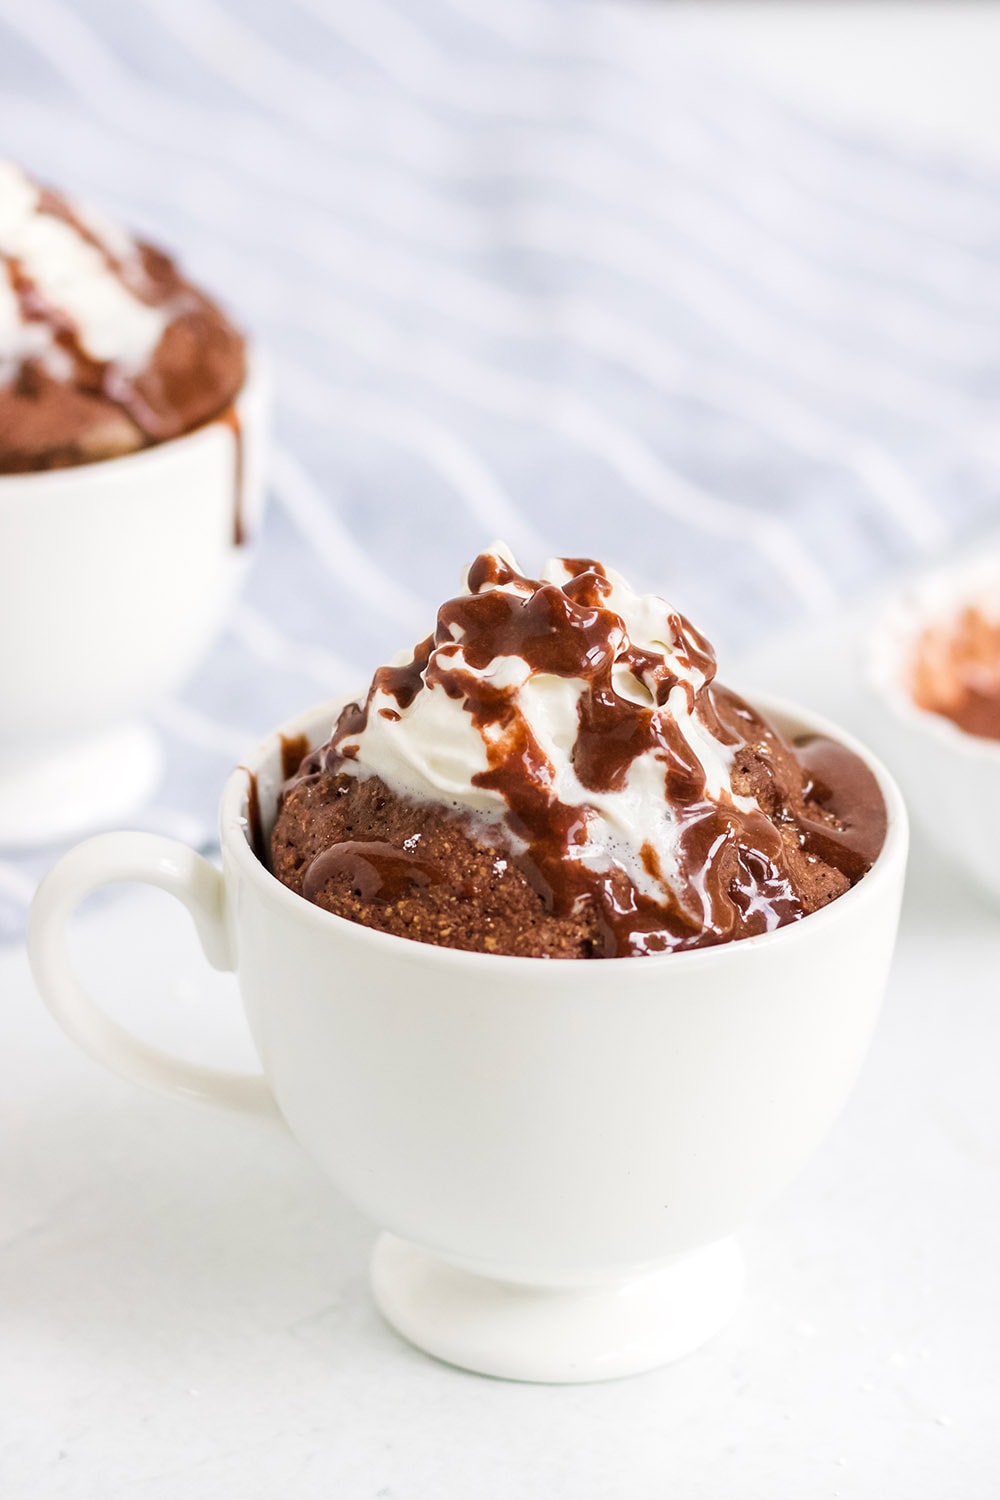 Low-carb chocolate mug cake with glaze and whipped topping.